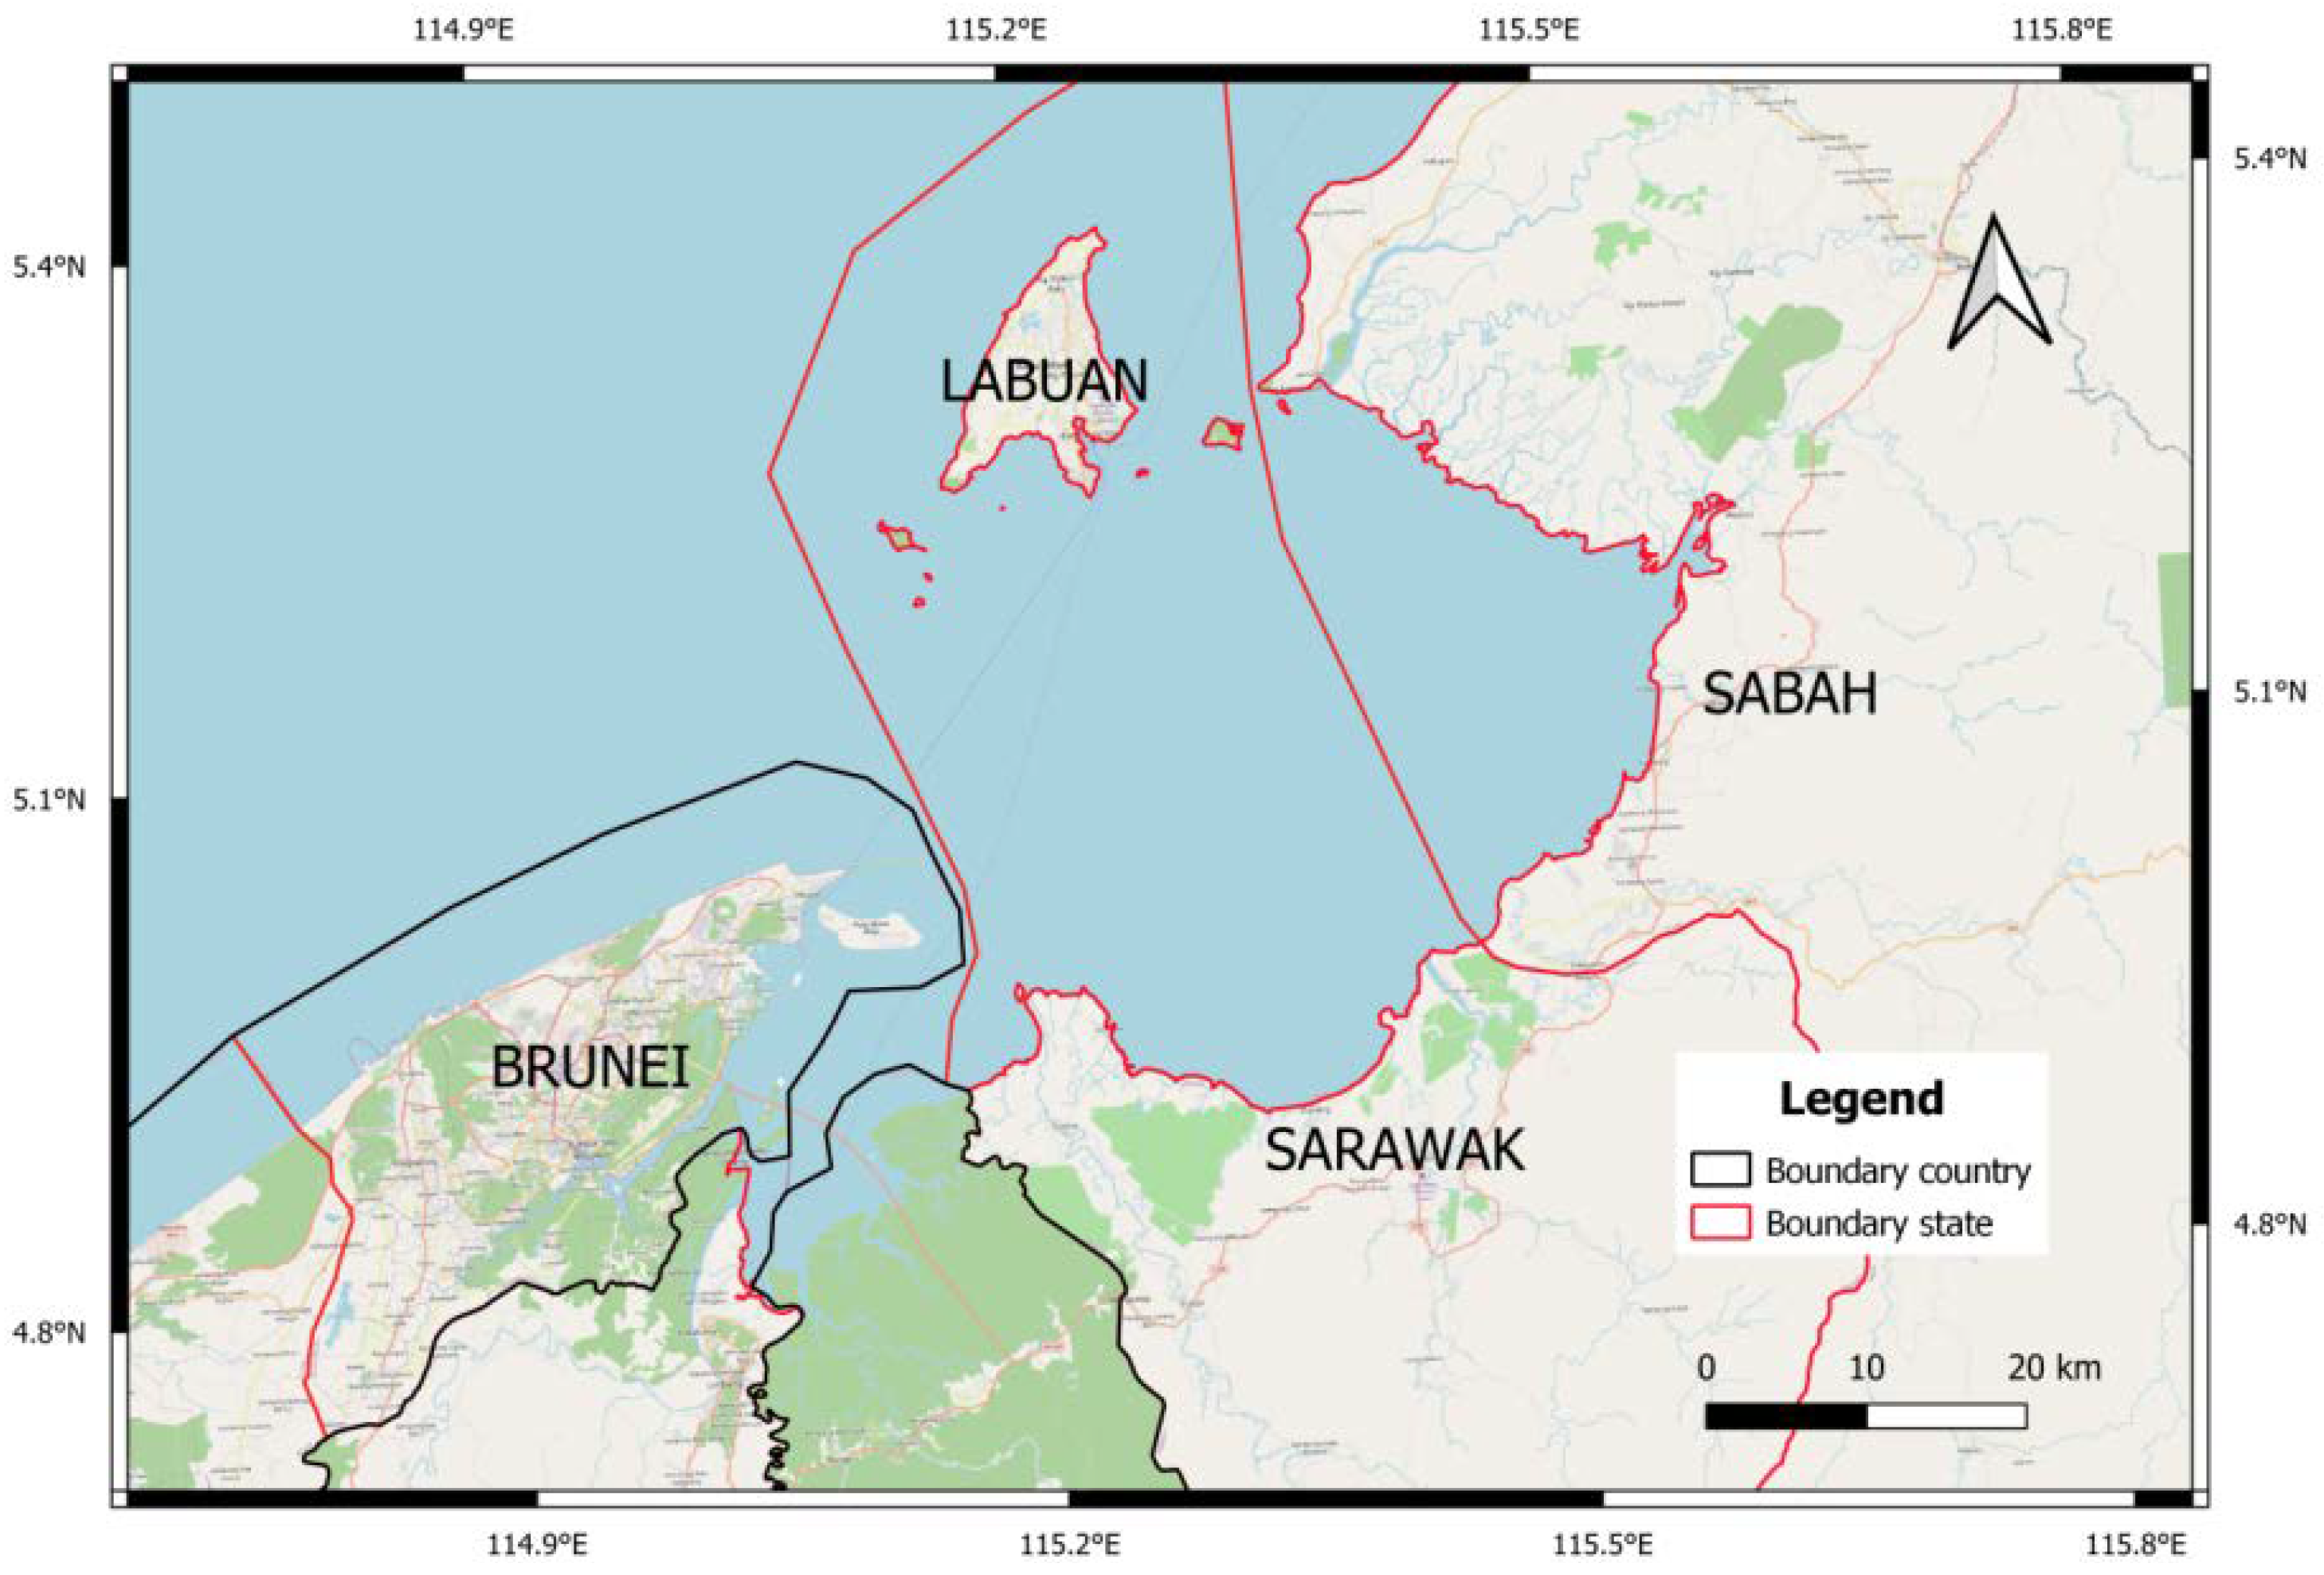 JMSE Free Full-Text Water Surface Behaviour of Irrawaddy Dolphin Orcaella brevirostris (Owen in Gray, 1866) and Influencing Factors in the Bay of Brunei, Brunei Darussalam pic